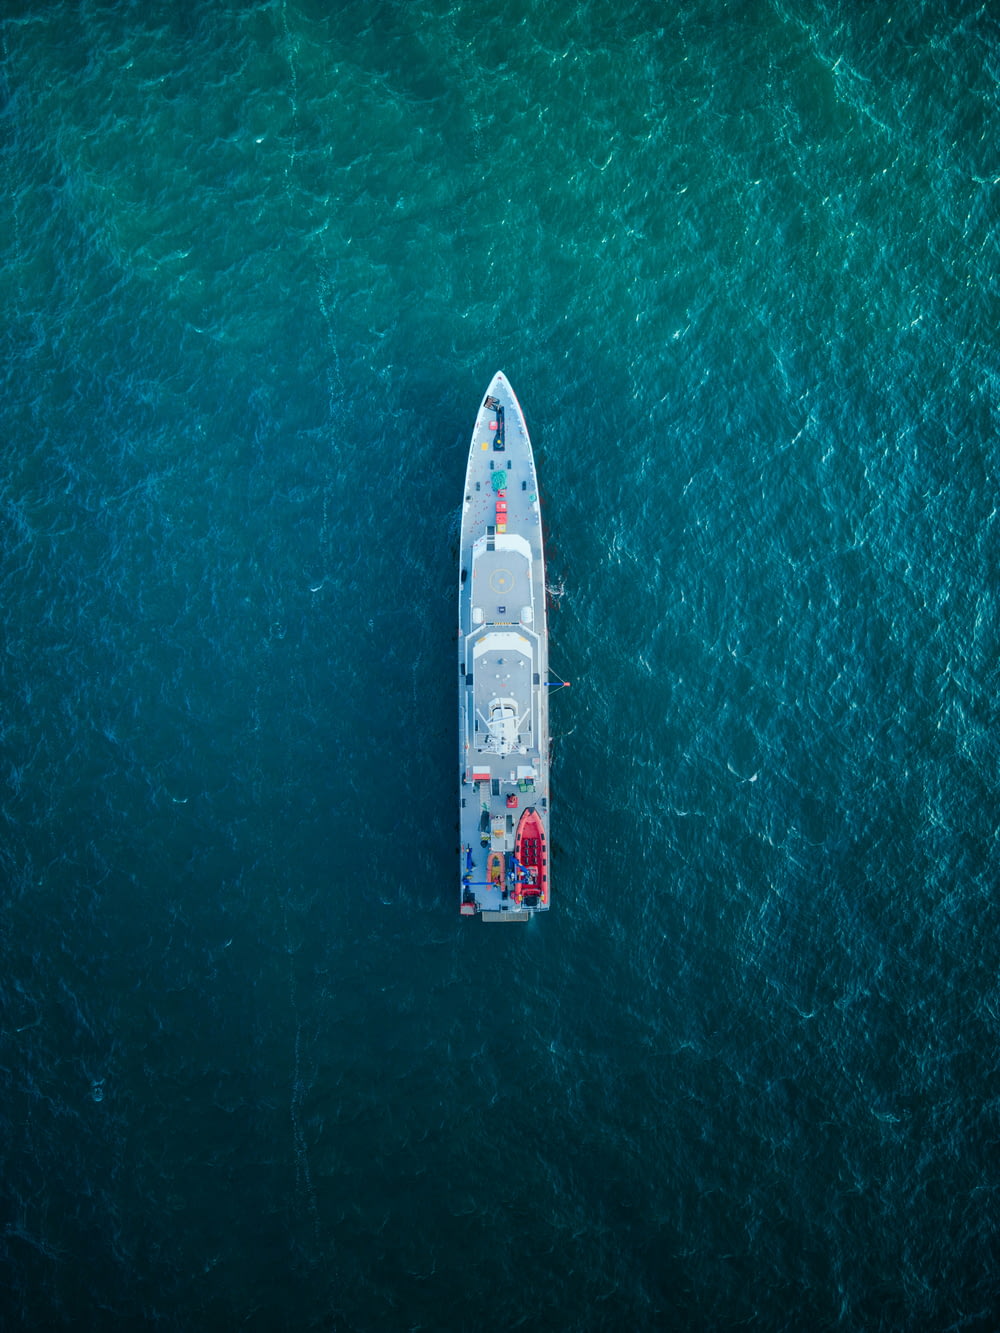 a small boat in the middle of the ocean